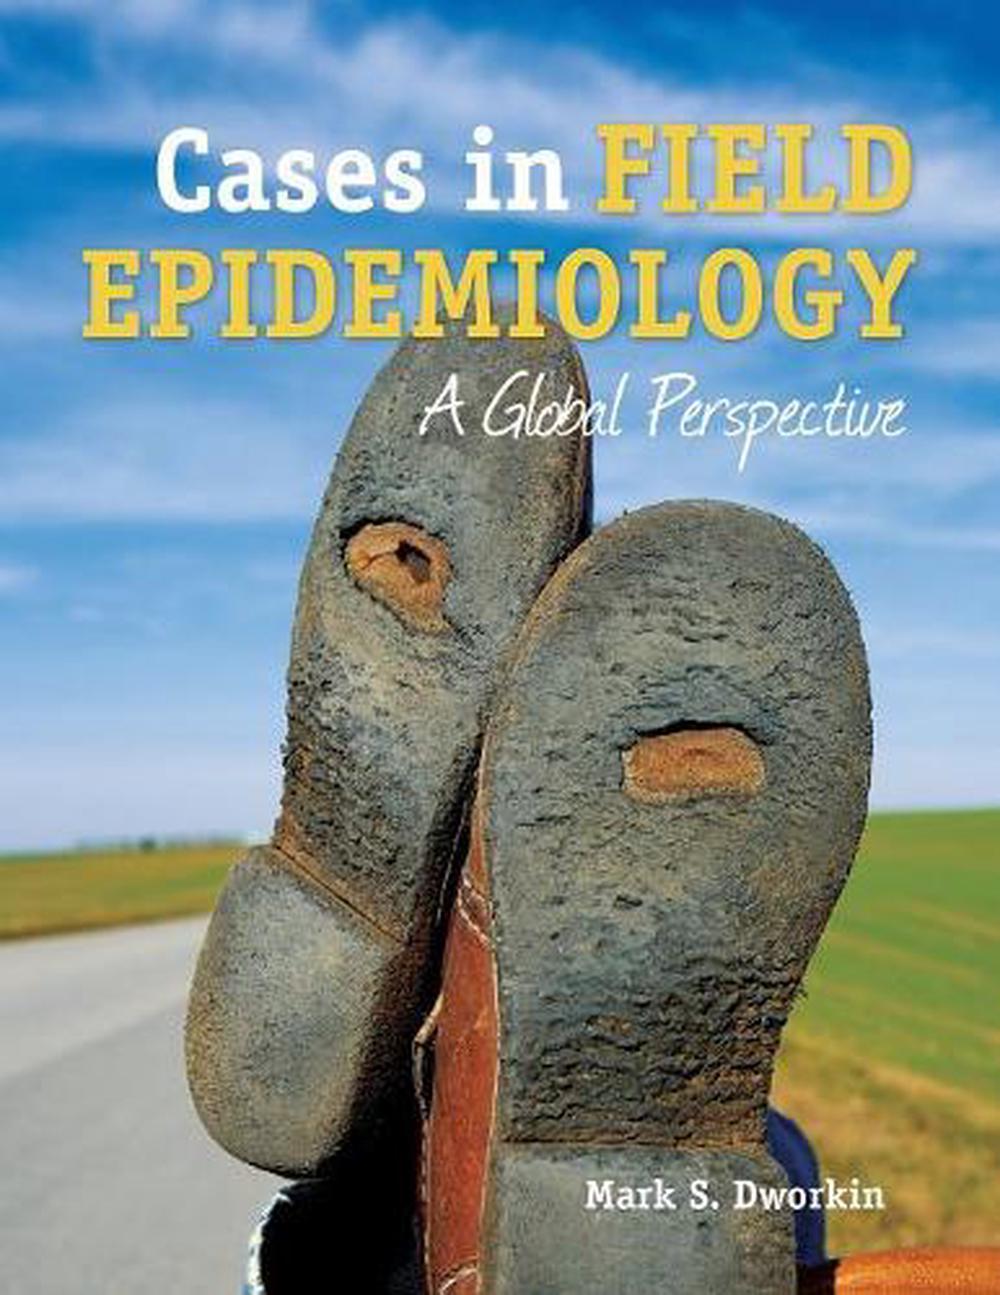 Cases in Field Epidemiology A Global Perspective by Mark S. Dworkin